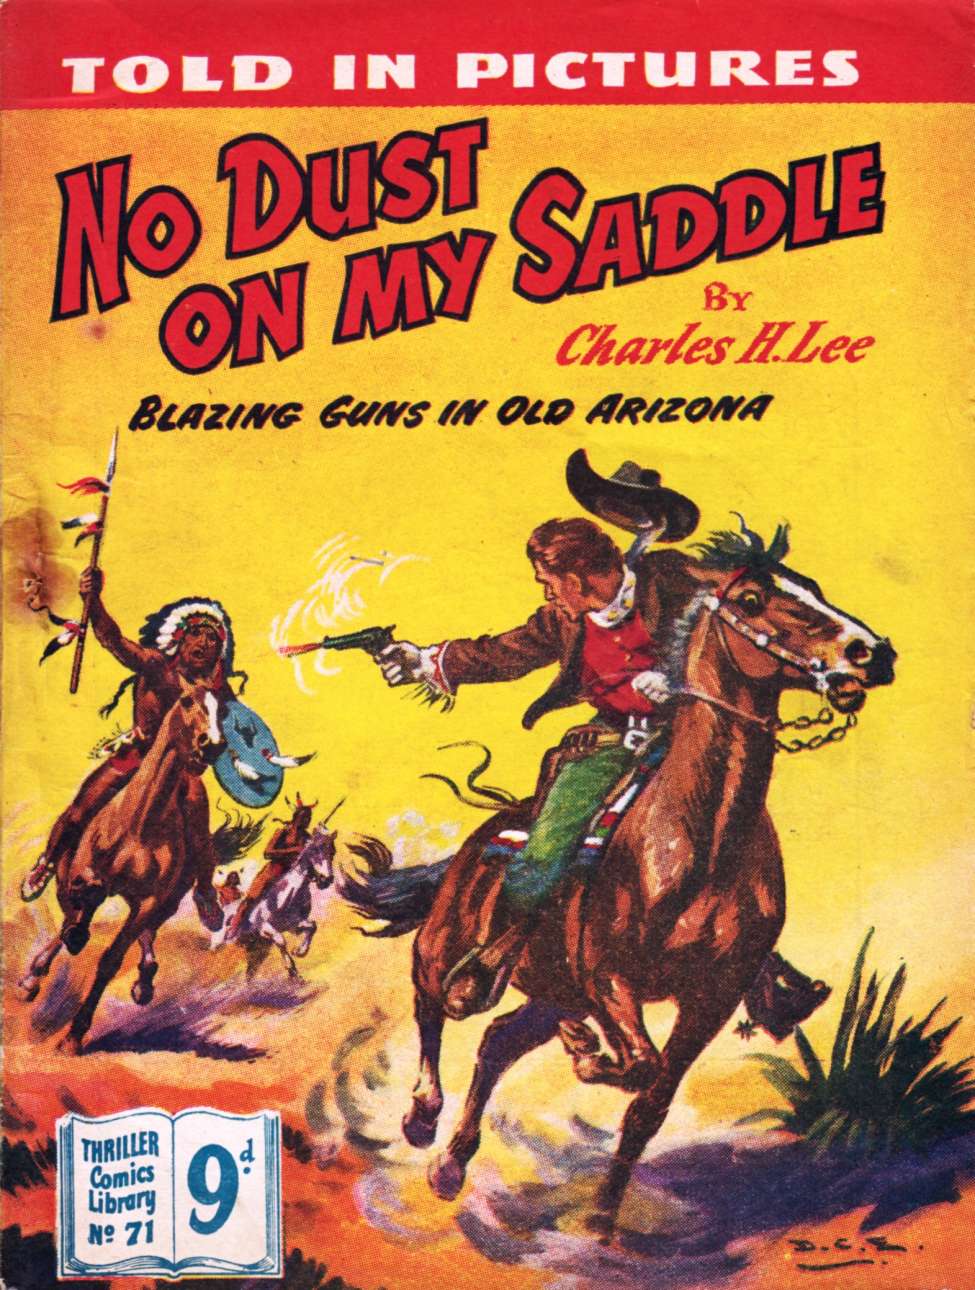 Book Cover For Thriller Comics Library 71 - No Dust on My Saddle